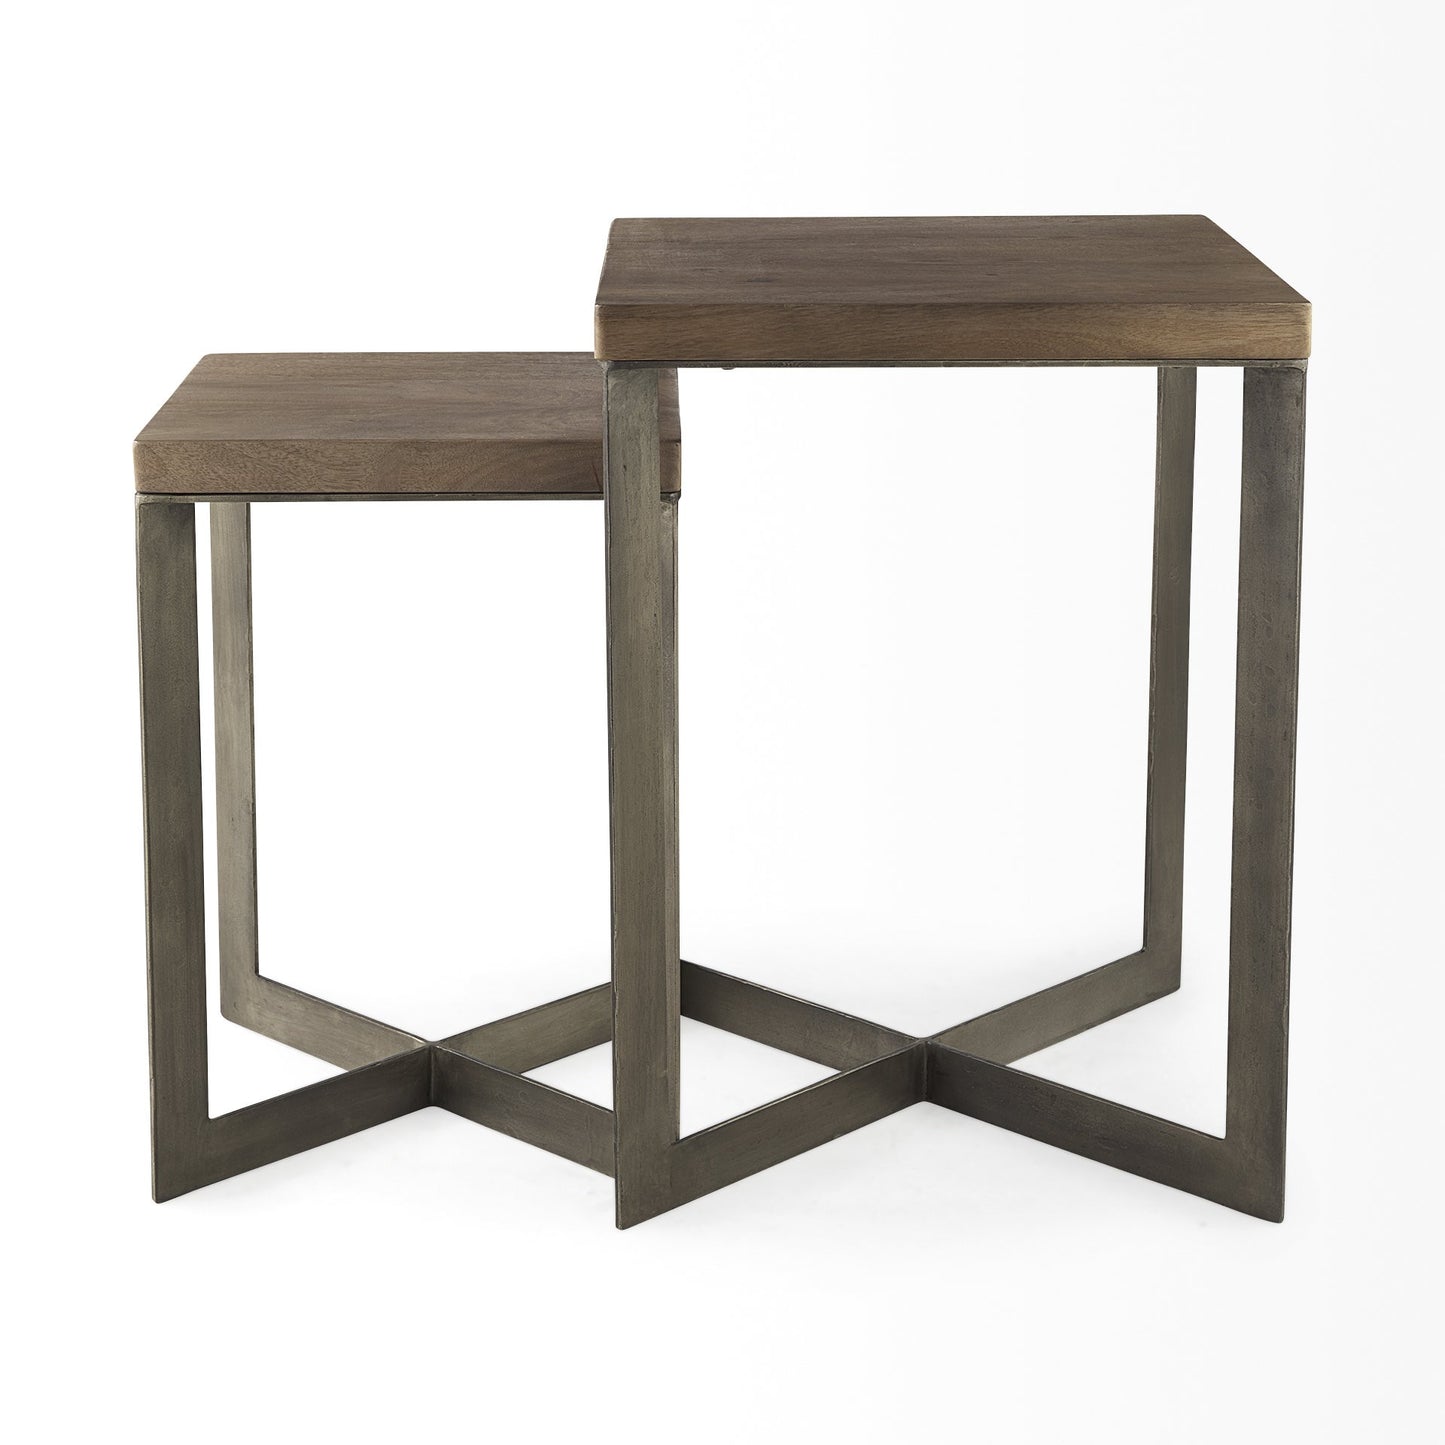 Set of Two Geo Dark Brown Metallic and Wood Tables By Homeroots